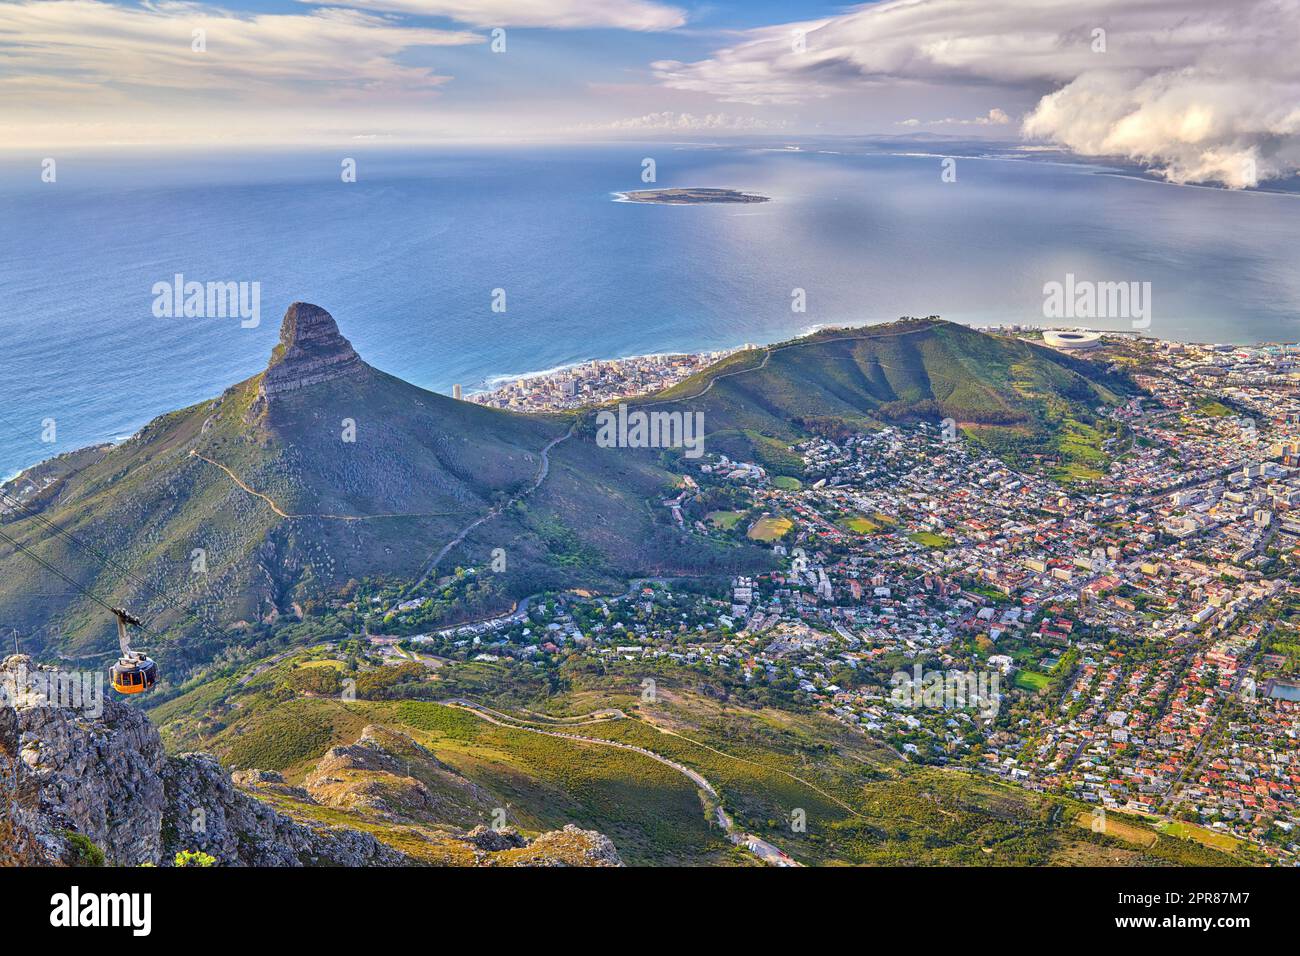 Aerial view of Lions Head mountain with the ocean and a cloudy sky copy space. Beautiful landscape of green mountains with vegetation surrounding an urban city in Cape Town, South Africa Stock Photo